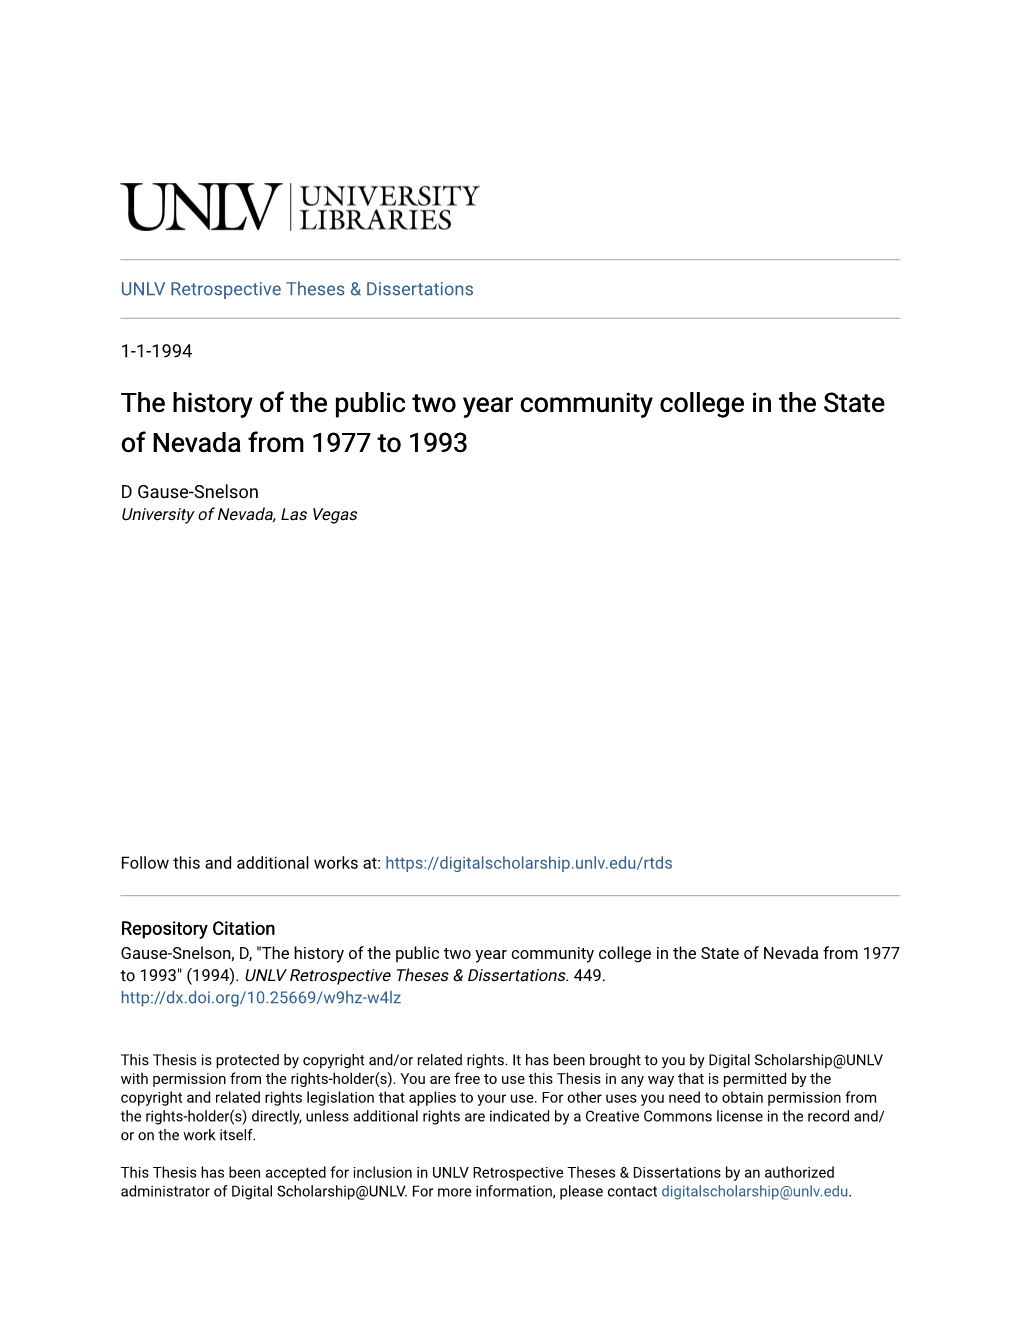 The History of the Public Two Year Community College in the State of Nevada from 1977 to 1993